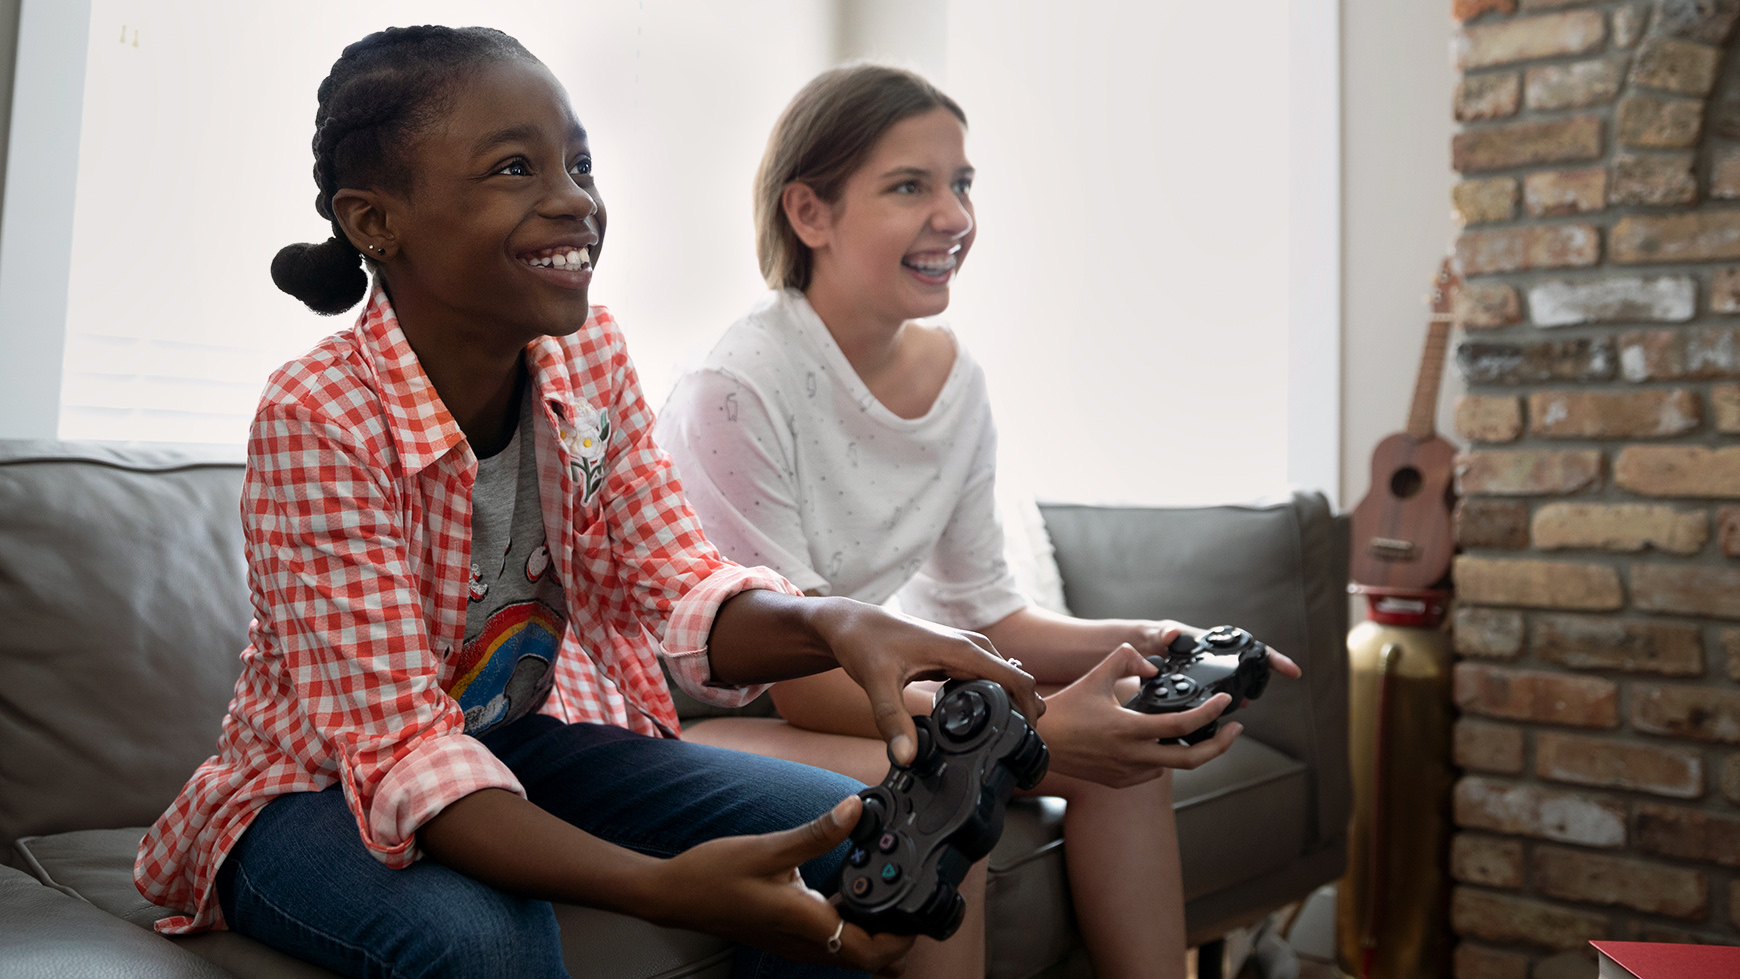 6 Benefits of Video Games for Kids | Understood - For learning and thinking  differences